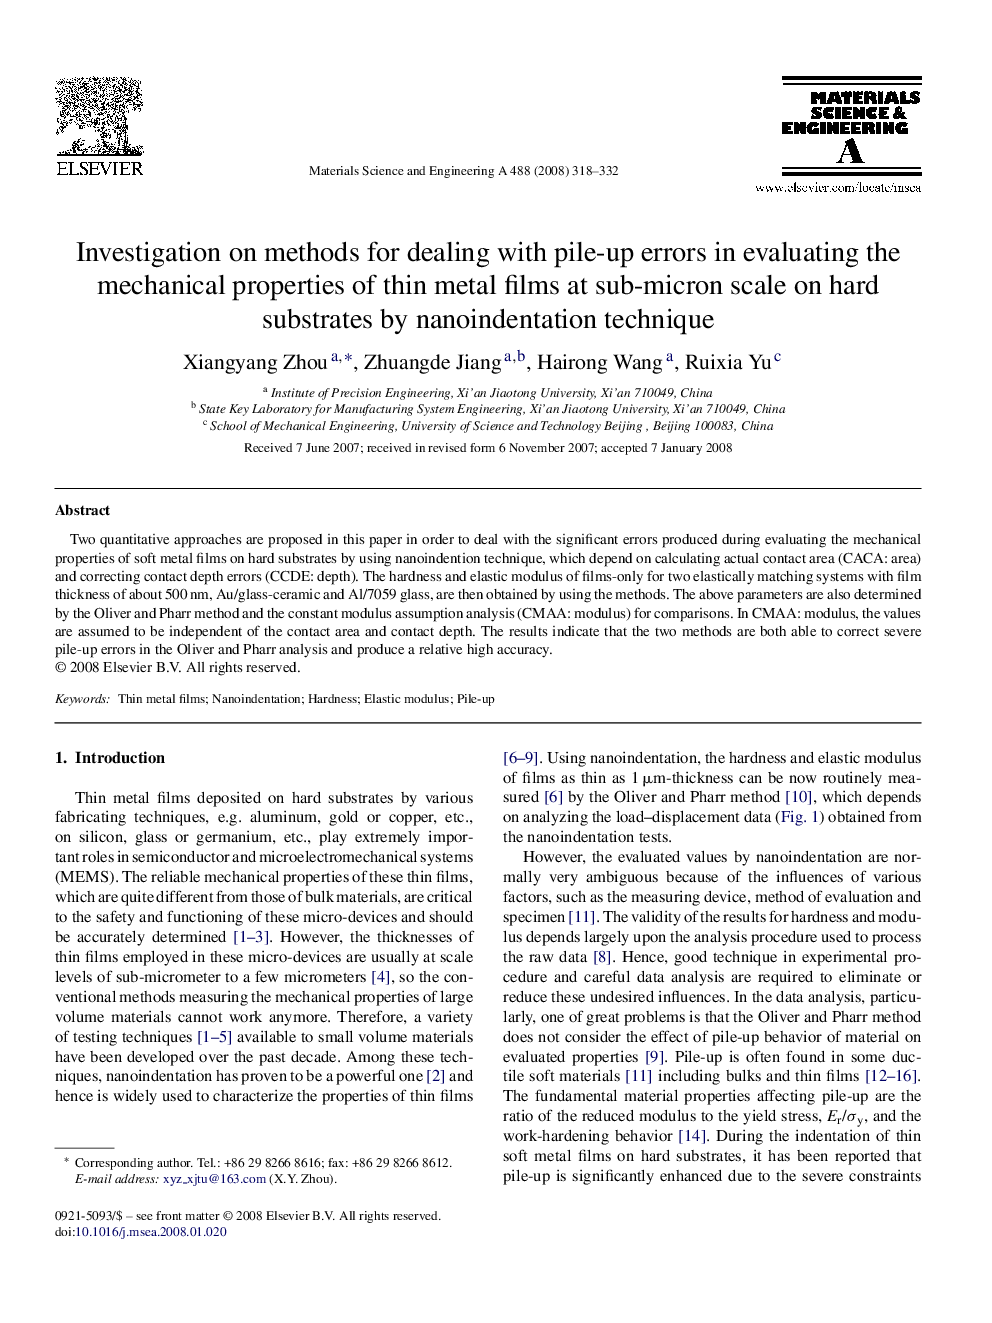 Investigation on methods for dealing with pile-up errors in evaluating the mechanical properties of thin metal films at sub-micron scale on hard substrates by nanoindentation technique